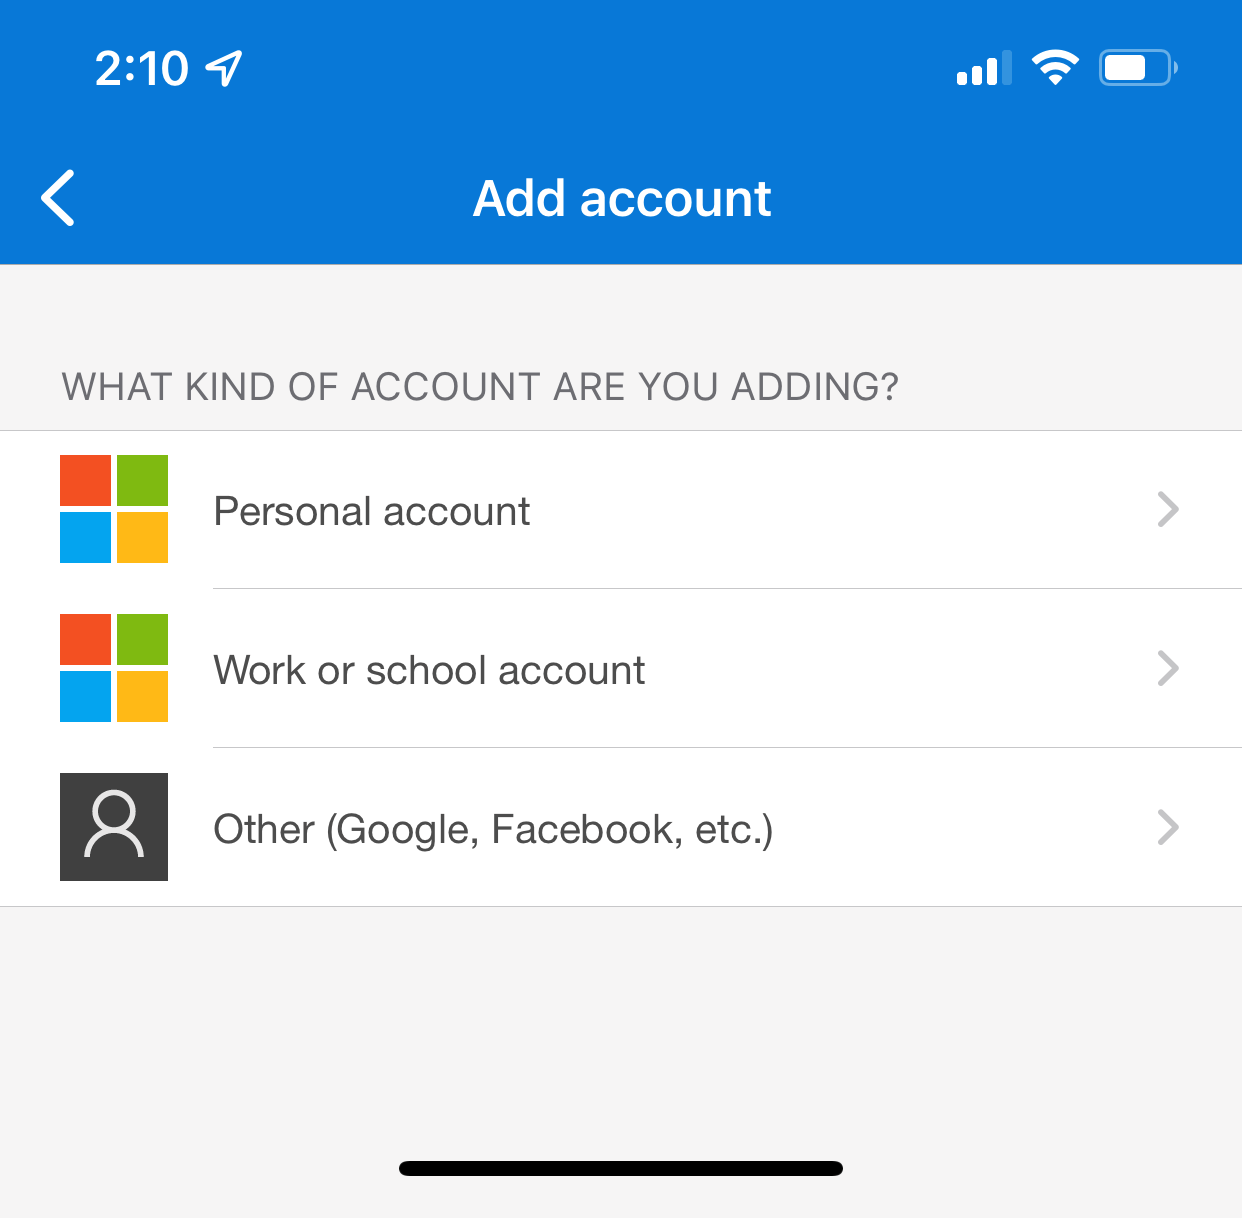 Screenshot is from Microsoft Authenticator app. User experience may vary based on choice of authenticator app.